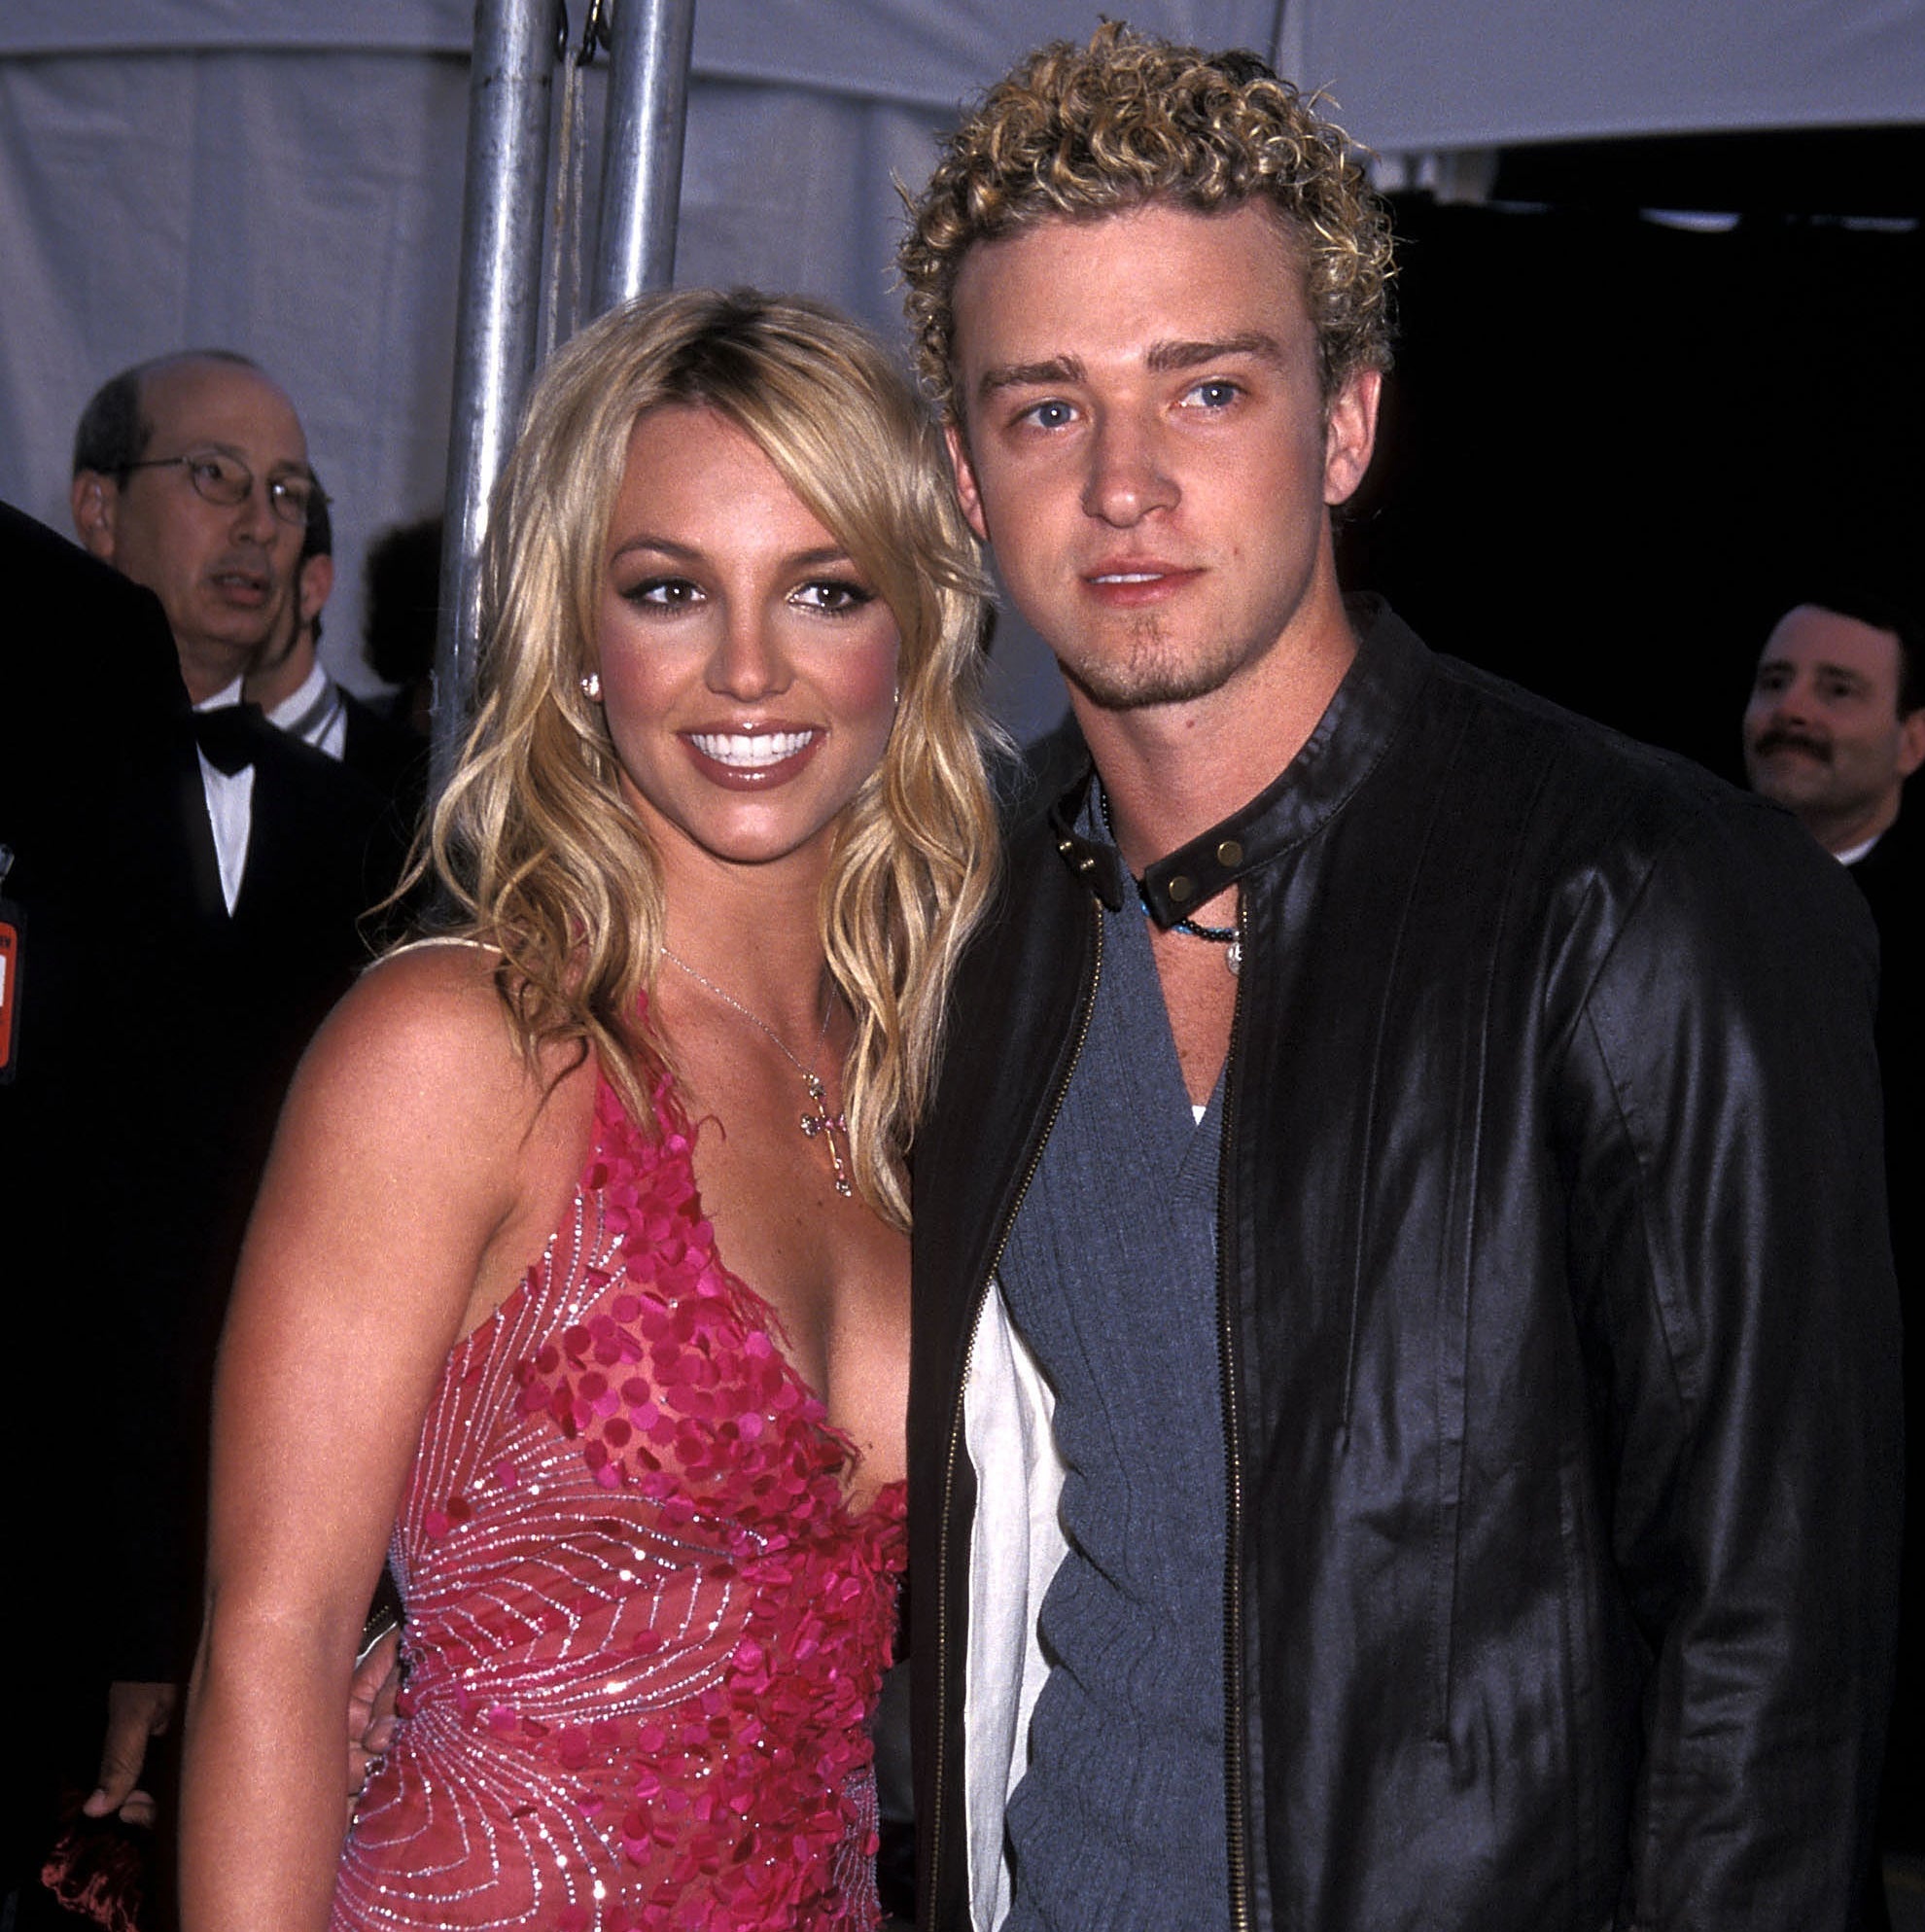 Justin Timberlake and Britney Spears smiling for photographers at an event